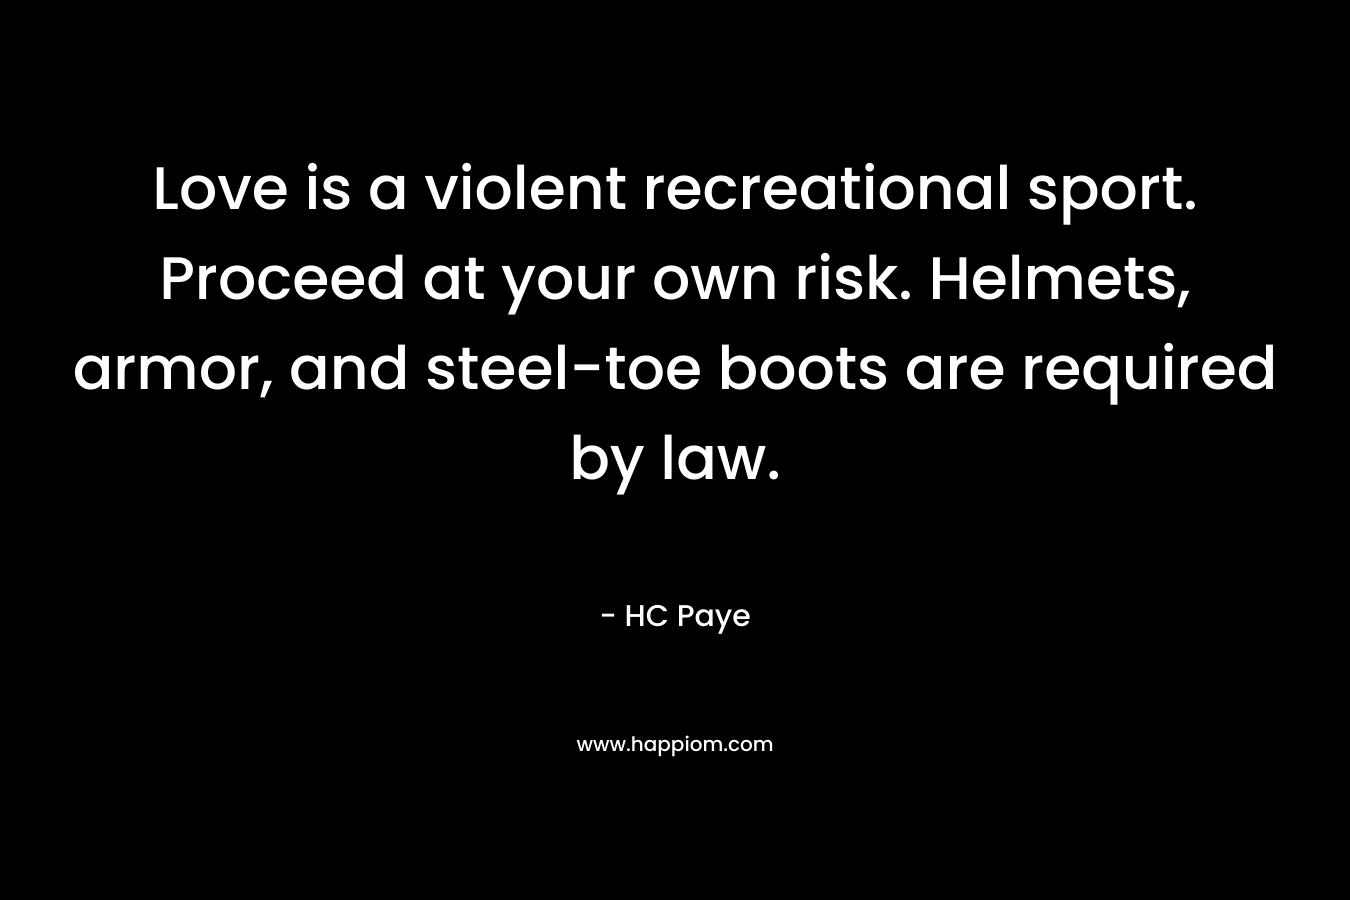 Love is a violent recreational sport. Proceed at your own risk. Helmets, armor, and steel-toe boots are required by law.